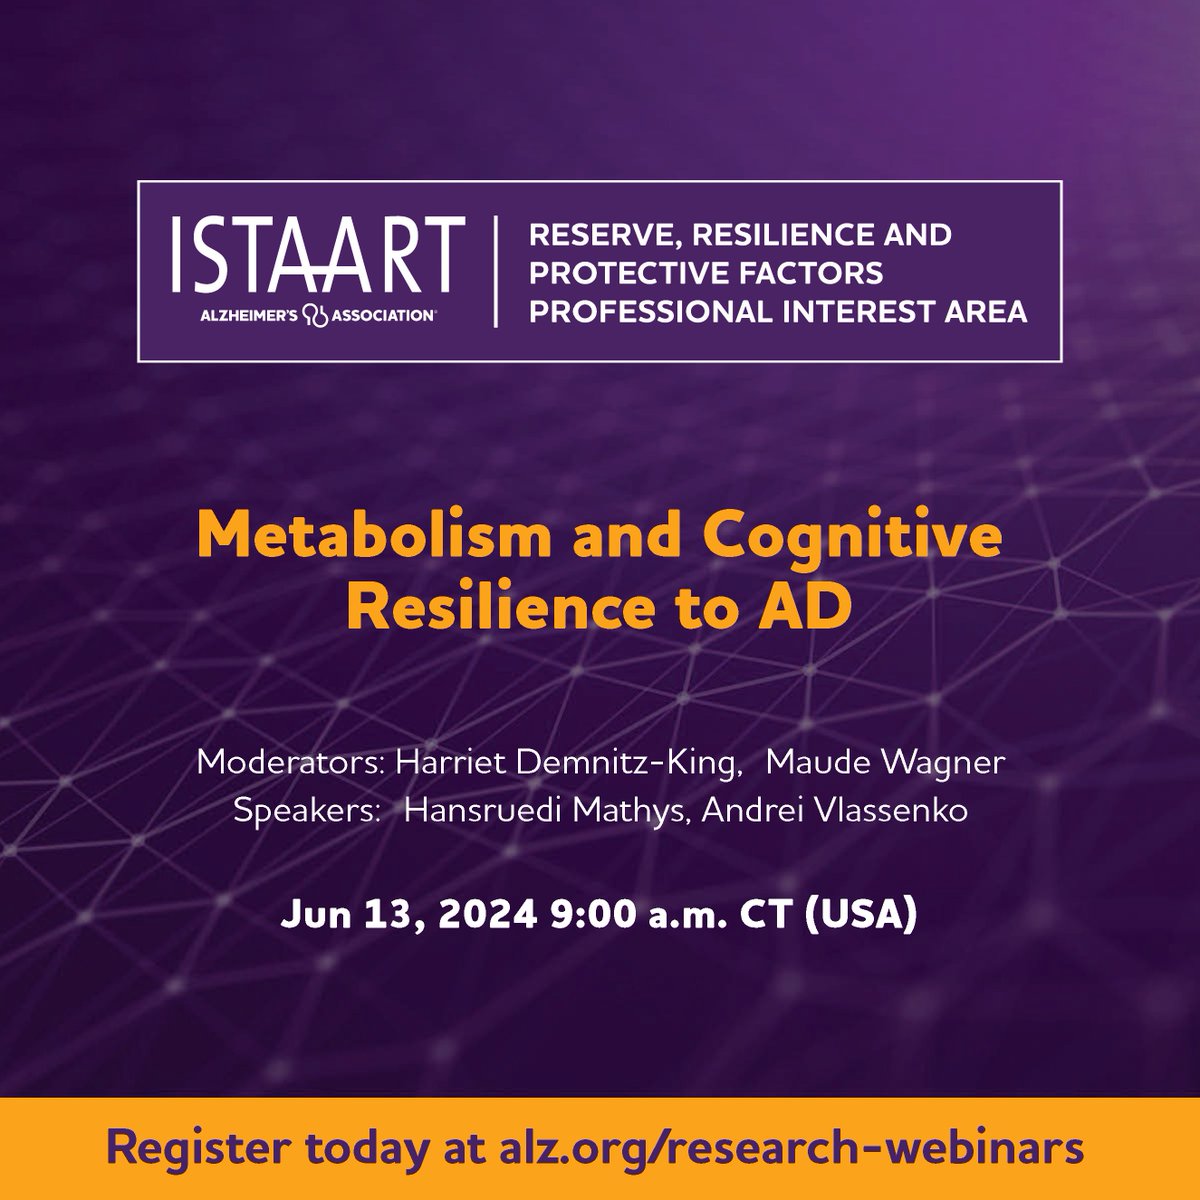 Upcoming webinar!! 🗓️🚨 If you are interested in hearing about the biological bases of cognitive resilience in AD, mark your calendars for our upcoming webinar with the @DesignDataPIA on June 13th at 9:00 am Central time. Register here 👉 alz.org/research-webin…